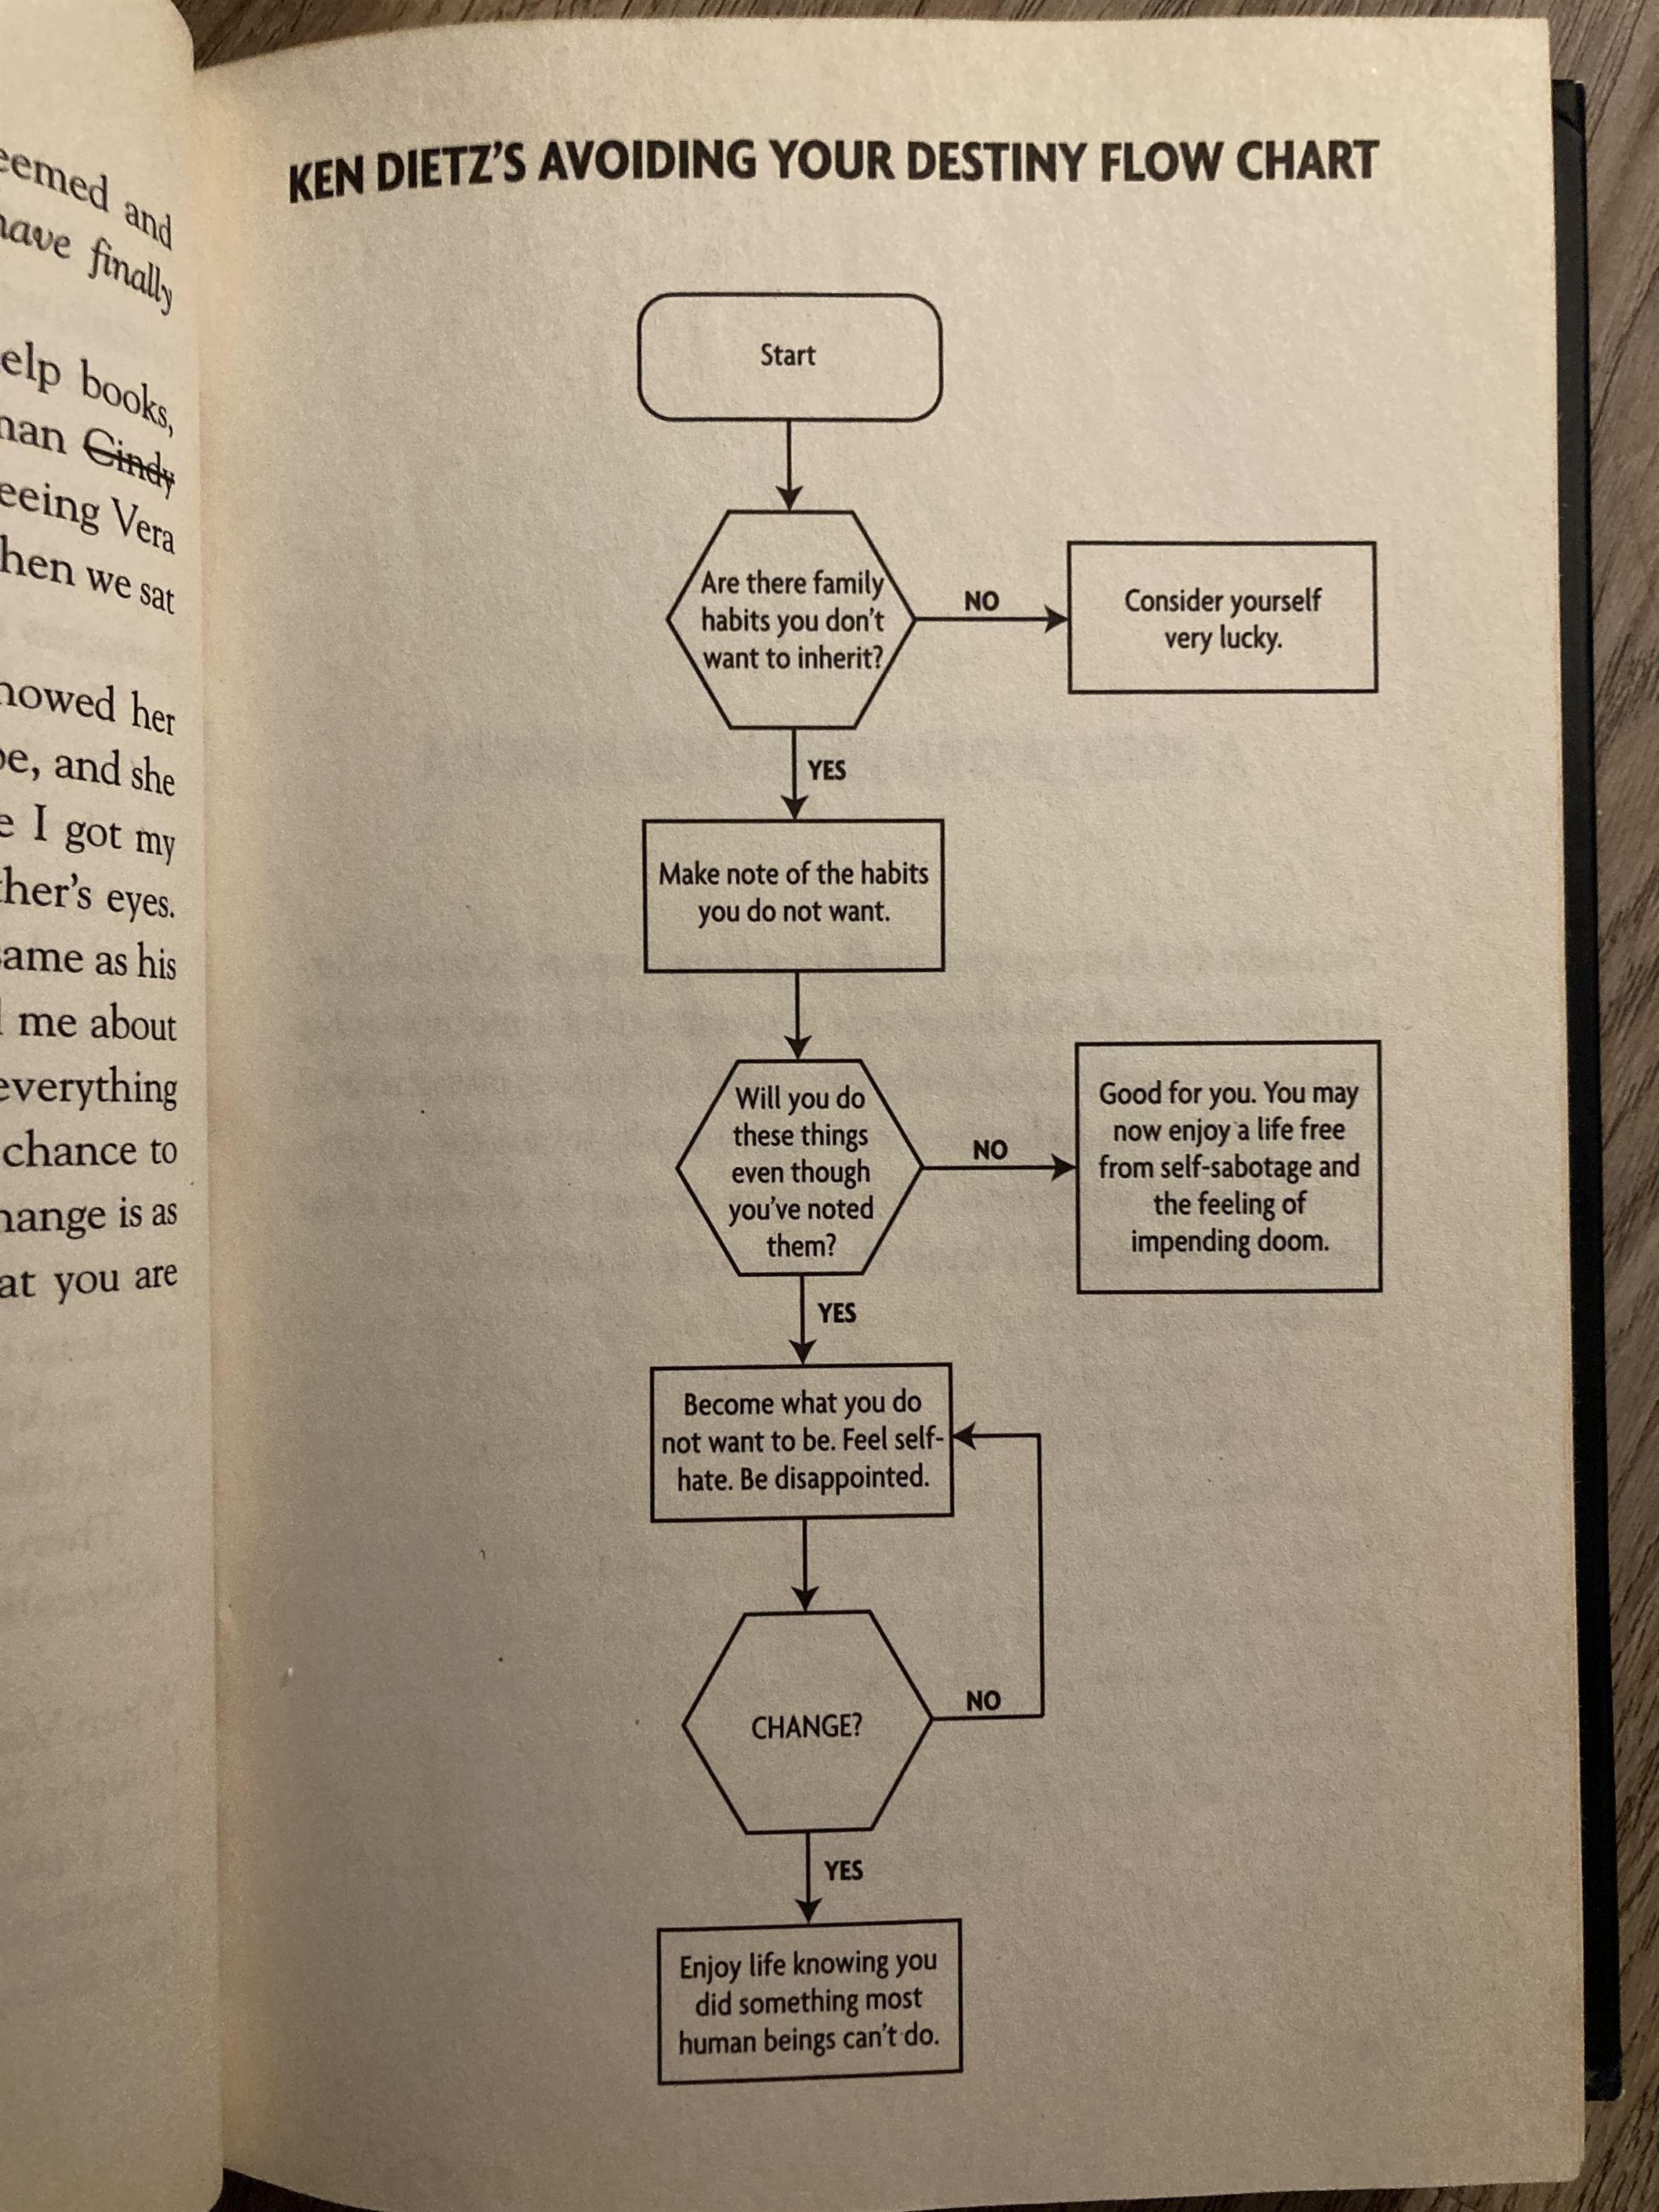 King's use of flow charts creates visual interest and gives insight into Ken Dietz's character.
Rebecca Bienskie Jackson | The Montclarion